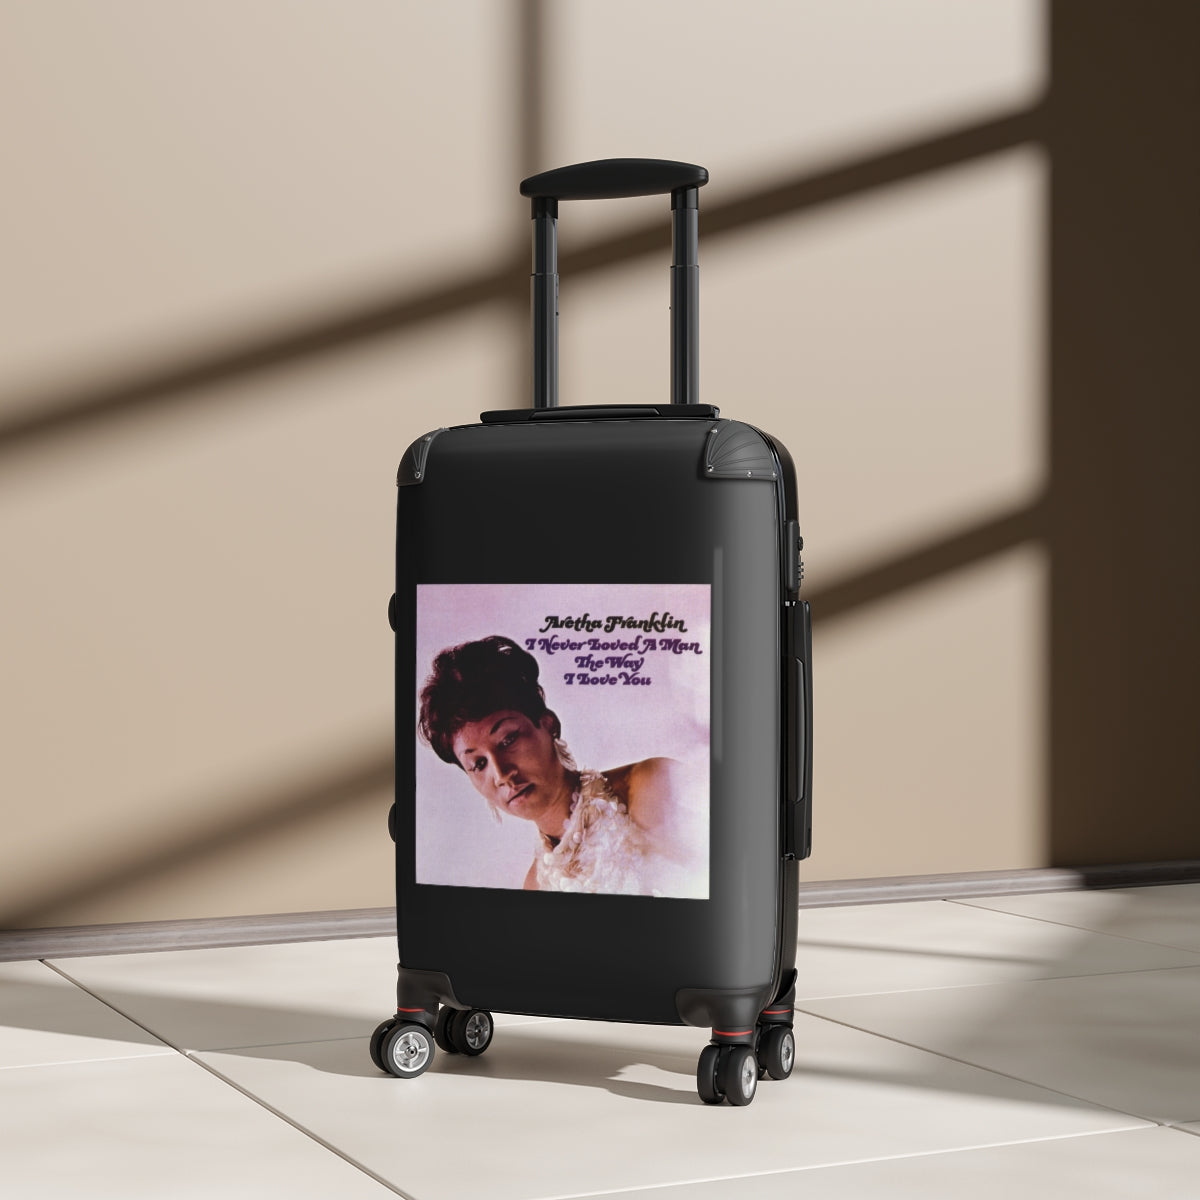 Getrott Aretha Franklyn I Never Loved a Man The Way that I Love You Black Cabin Suitcase Inner Pockets Extended Storage Adjustable Telescopic Handle Inner Pockets Double wheeled Polycarbonate Hard-shell Built-in Lock